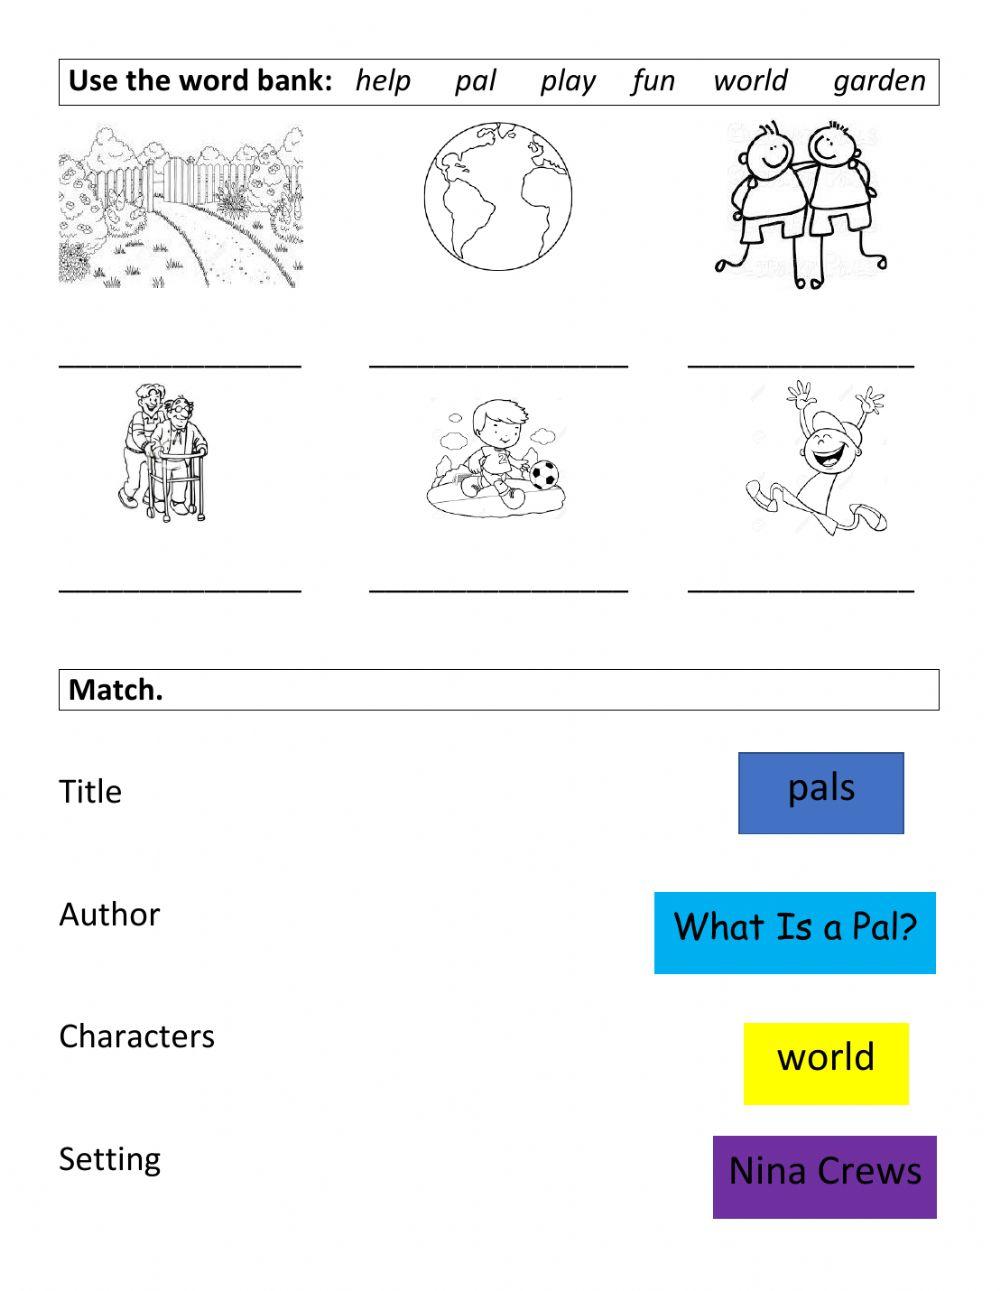 What is a Pal? key words and literary elelments